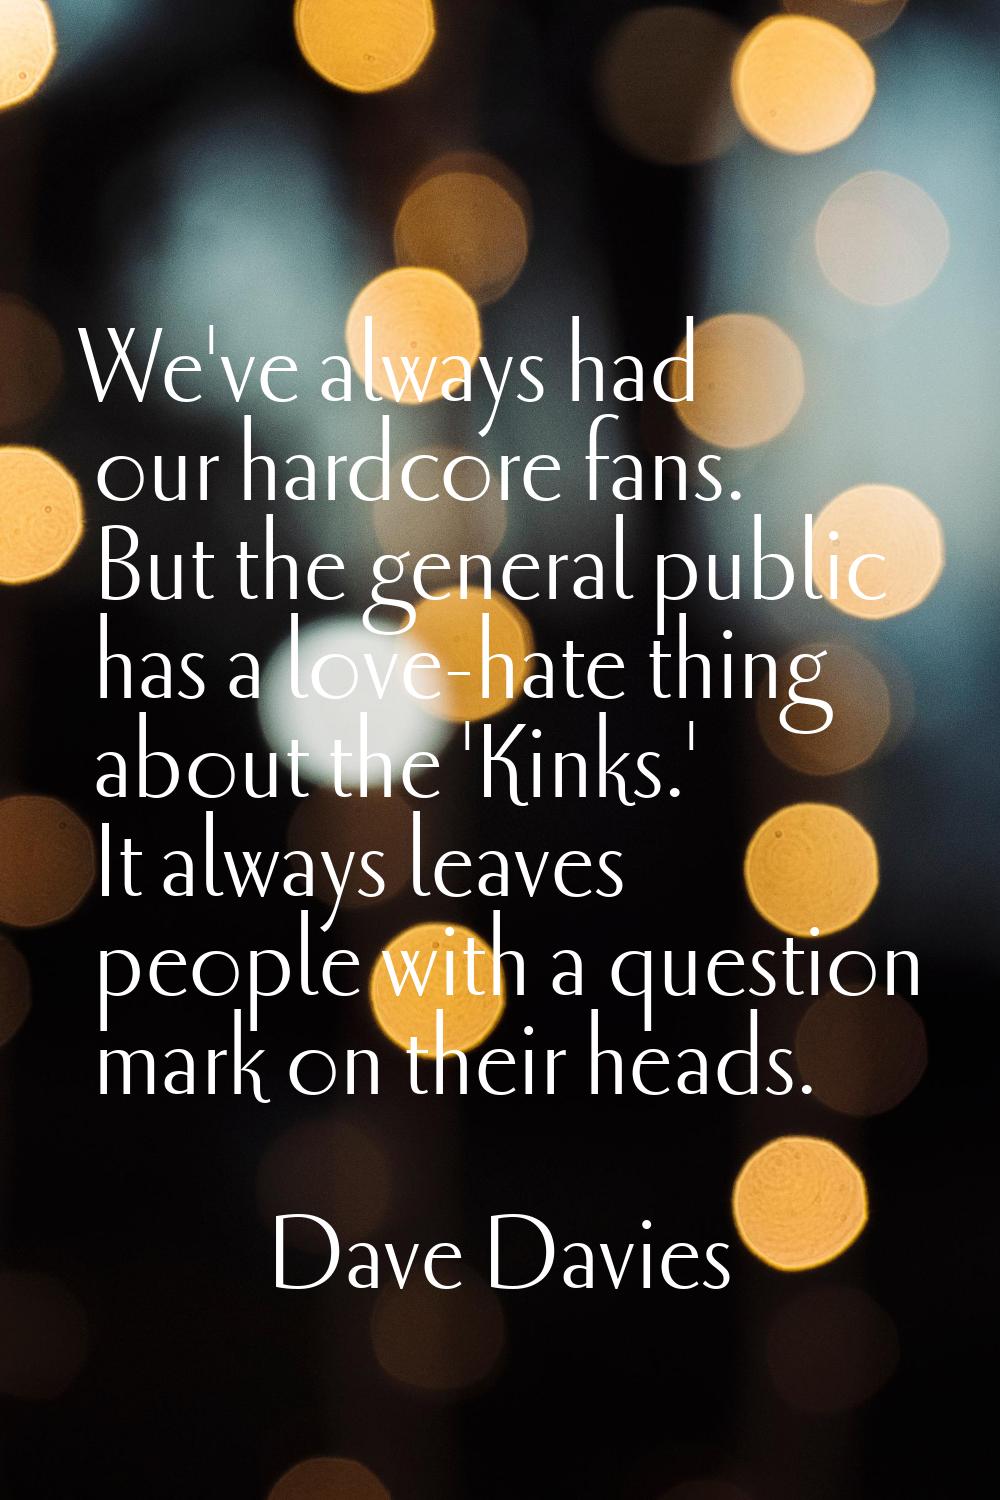 We've always had our hardcore fans. But the general public has a love-hate thing about the 'Kinks.'